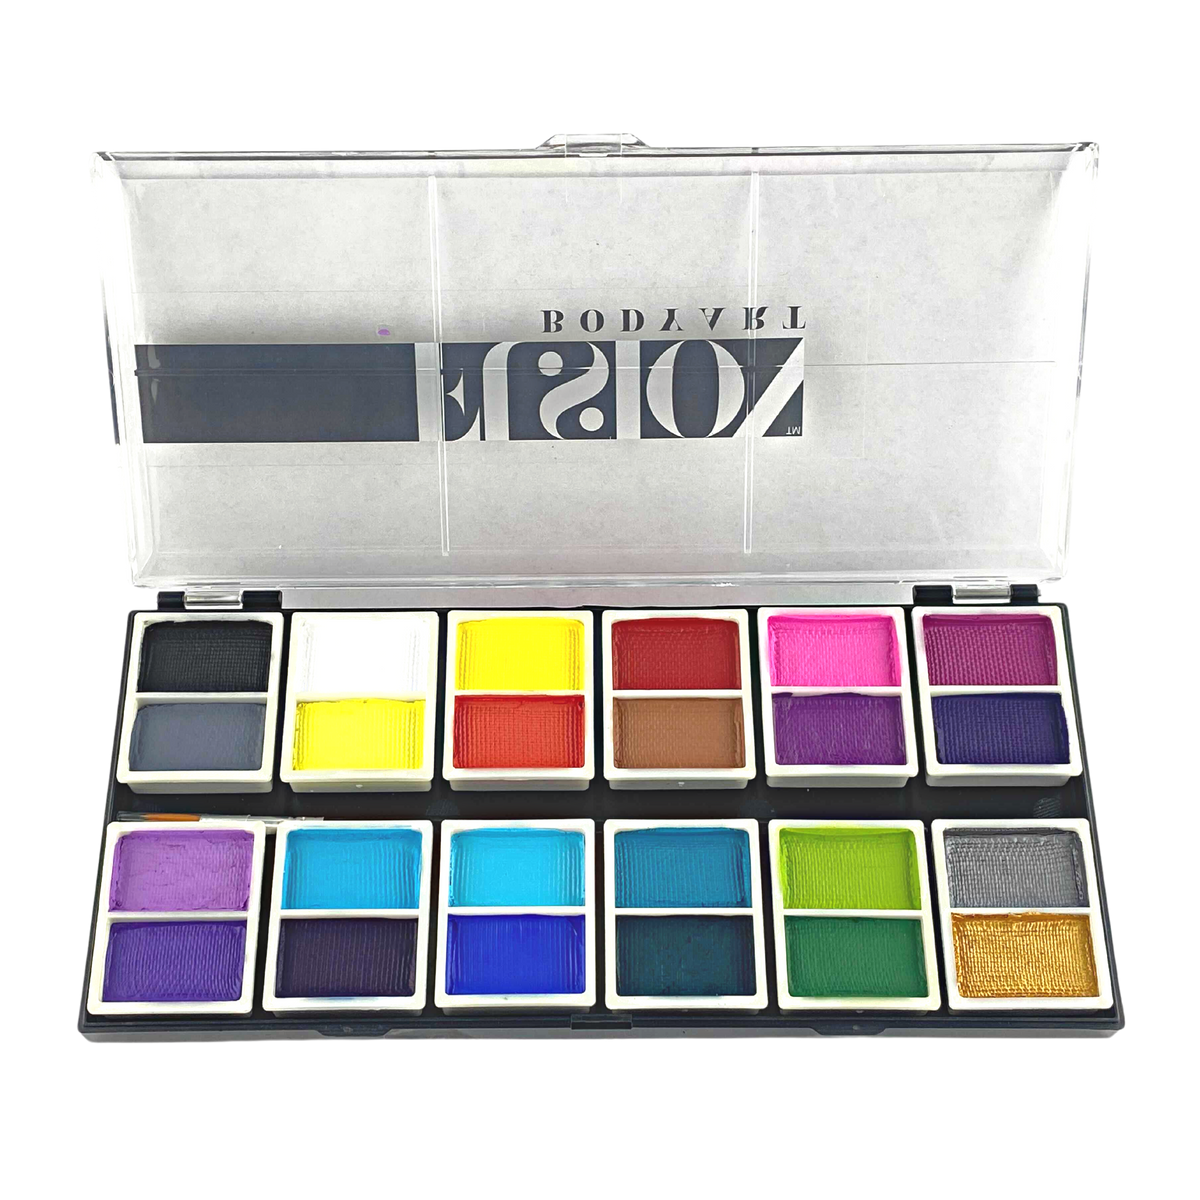 Fusion Body Art  The Ultimate Face Painting Palette - 24 Colors